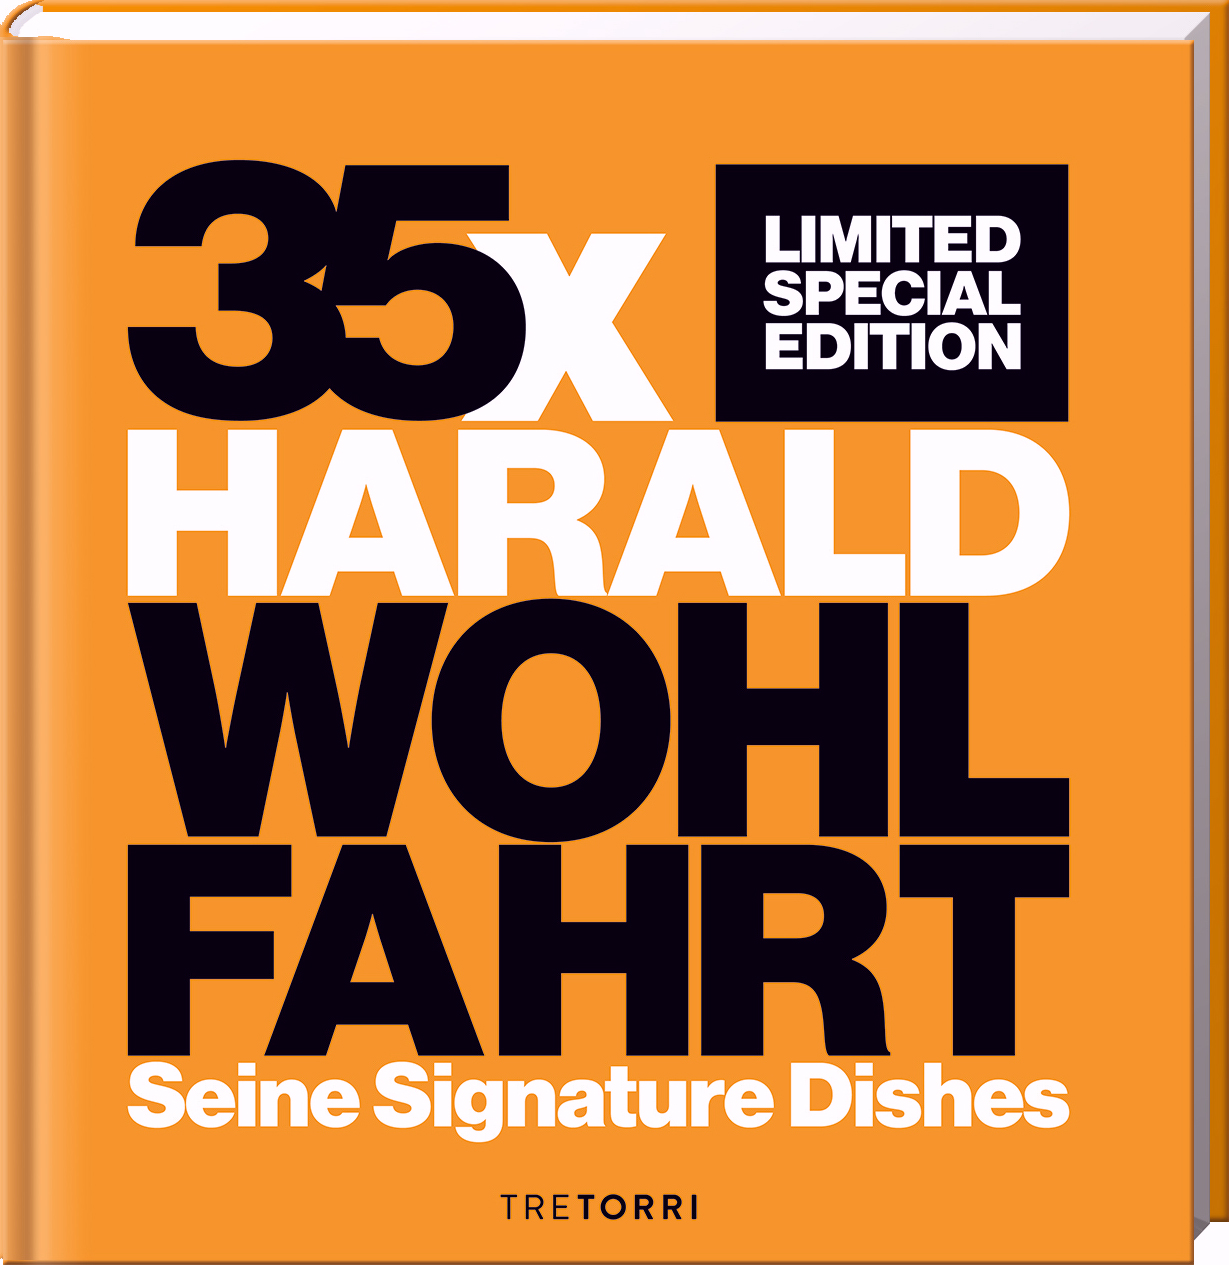 Harald Wohlfahrt - Limited Special Edition